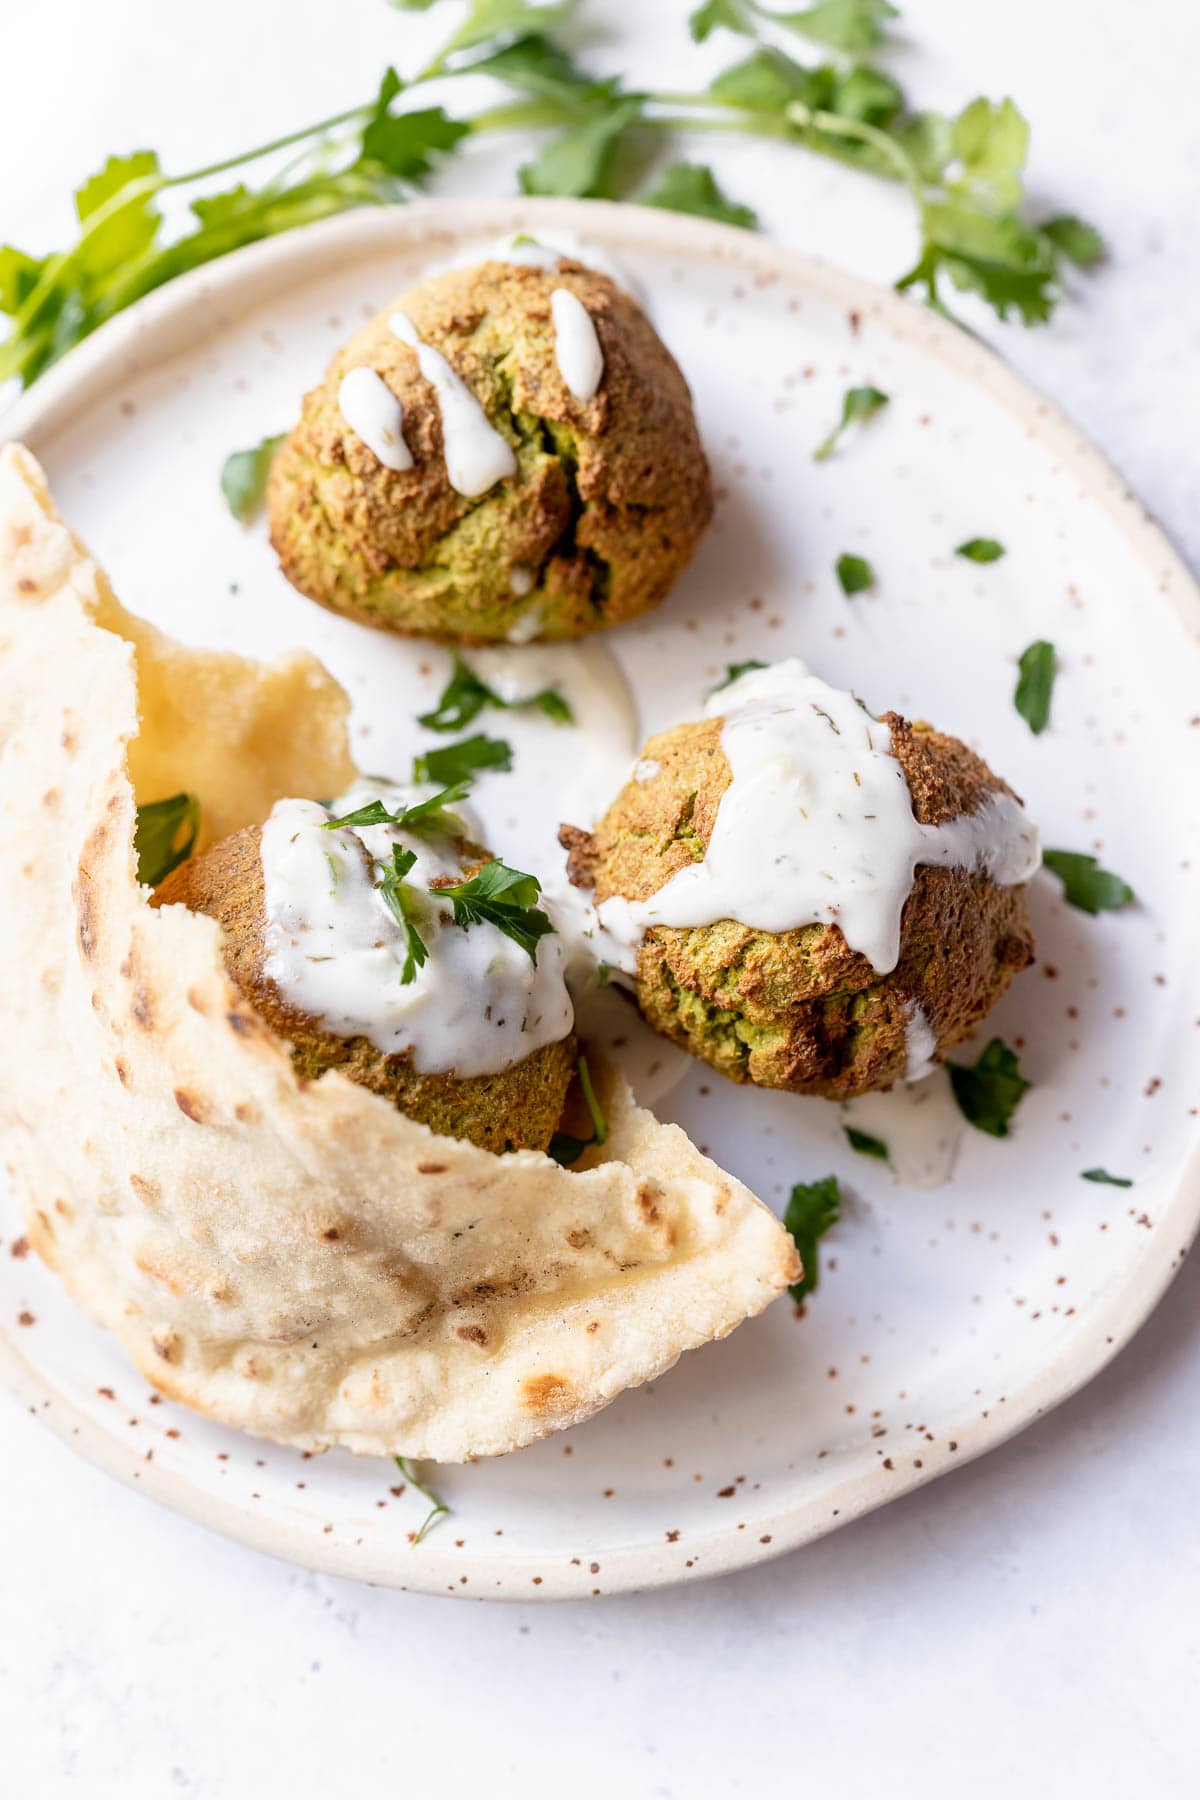 Crispy falafel balls topped with white sauce and green herbs resting on a plate with pita bread.